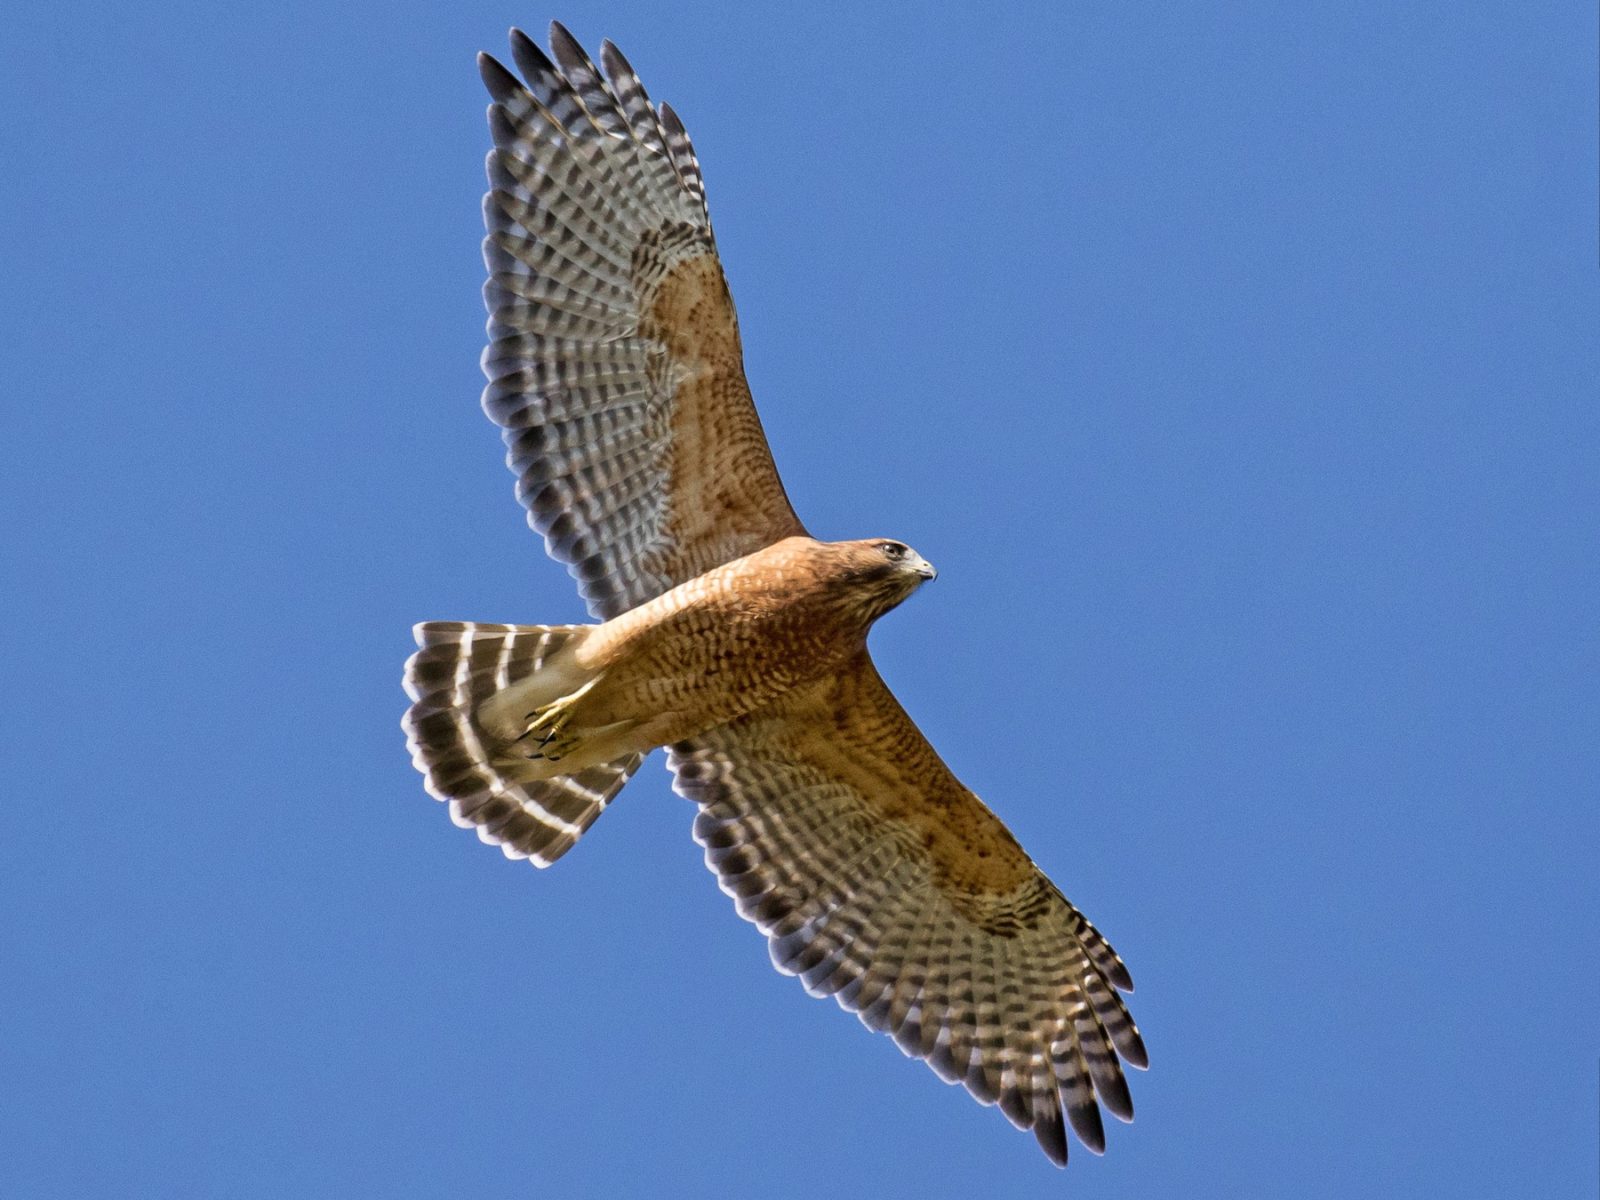 Common hawk in neighborhoods. Found in deciduous forests near water. See them On the Wildlife Walk. Female: Arrived in 2017 after hitting a window and damaging her sight. Annual food cost: $750